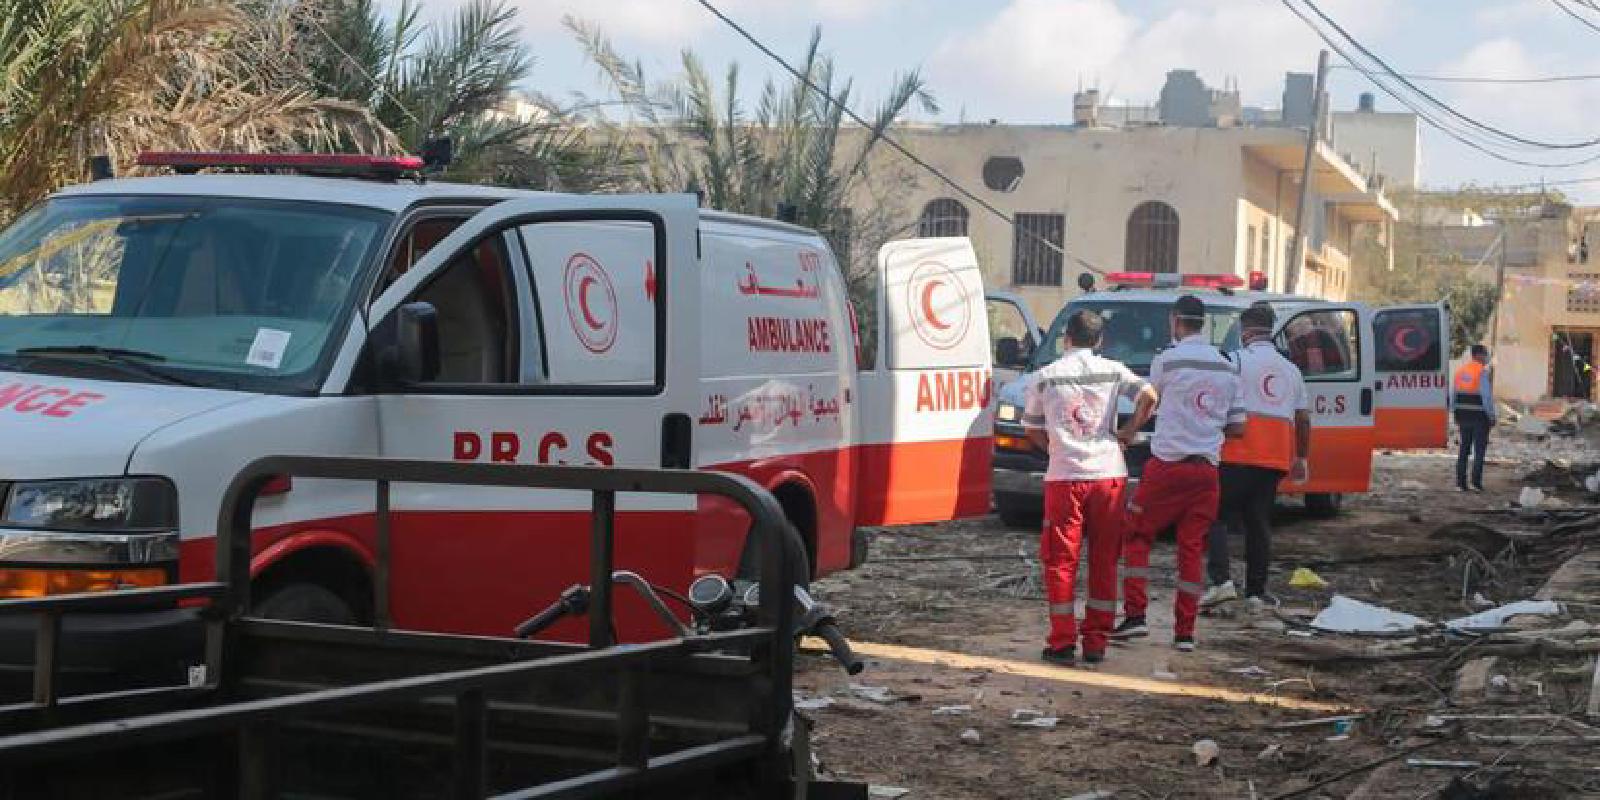 Paramedics from the Palestine Red Crescent attempt to reach injured individuals in a conflict area